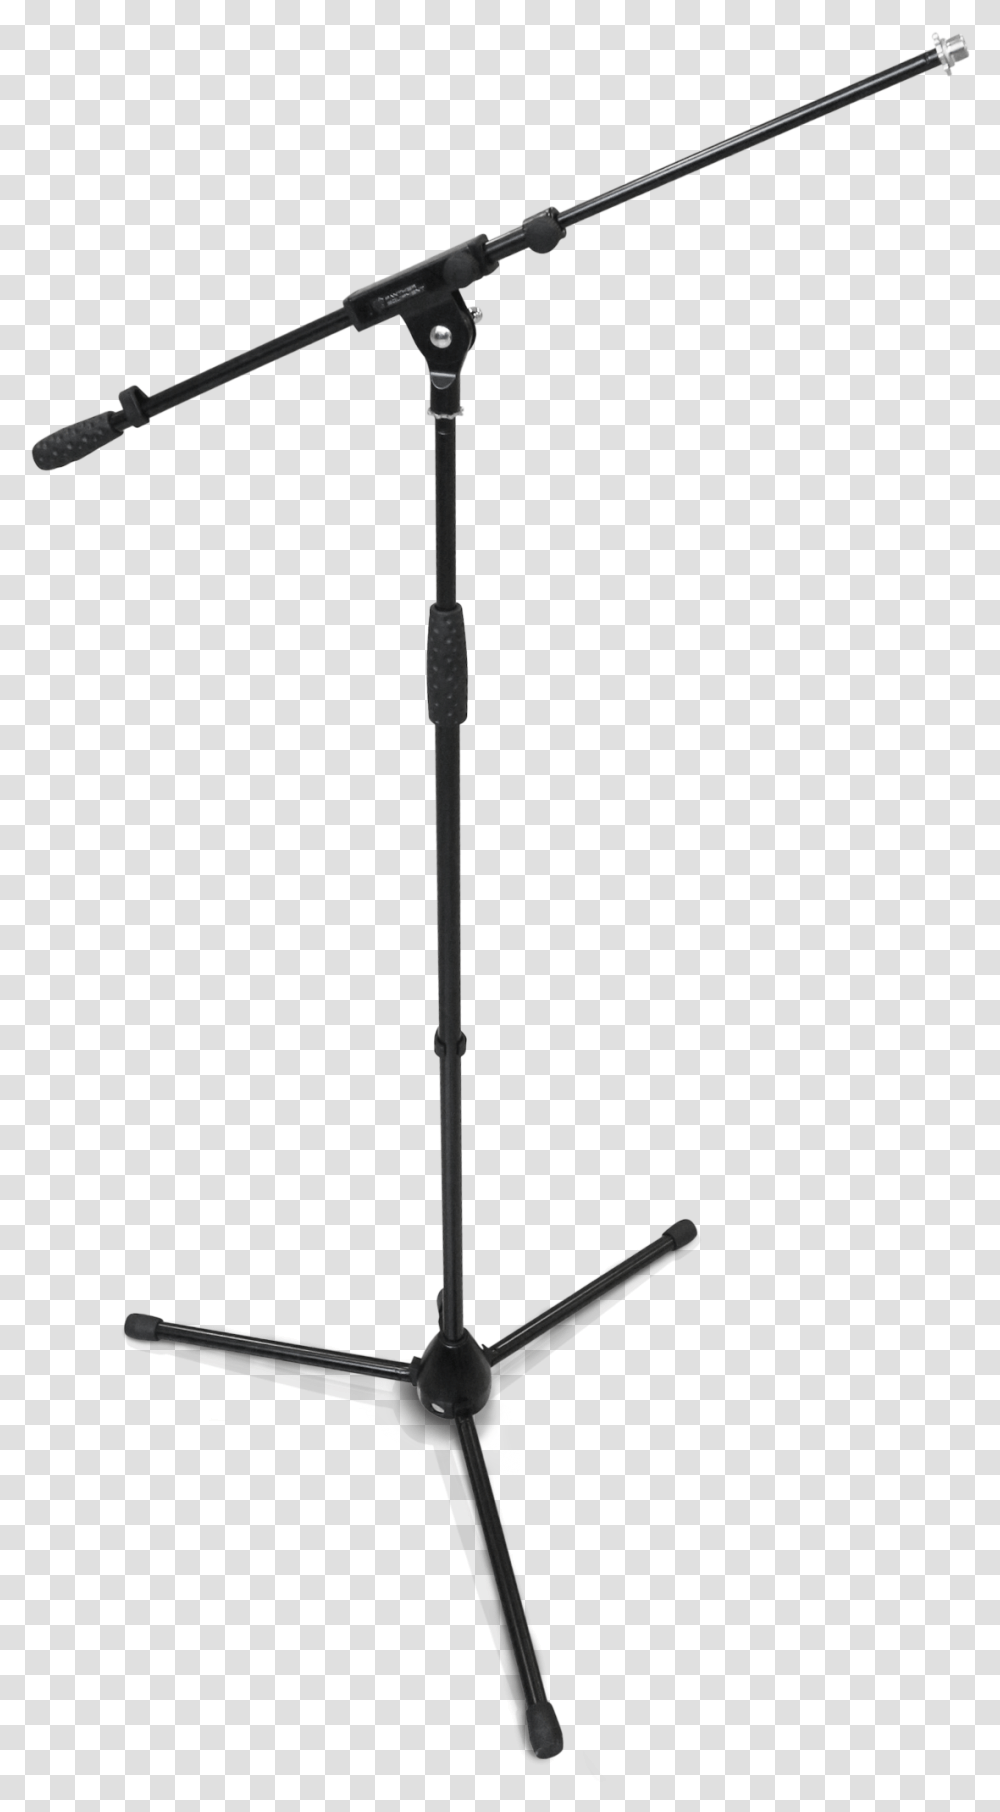 Microphone Stand Microphone Stand Should Stand, Sword, Blade, Weapon, Weaponry Transparent Png